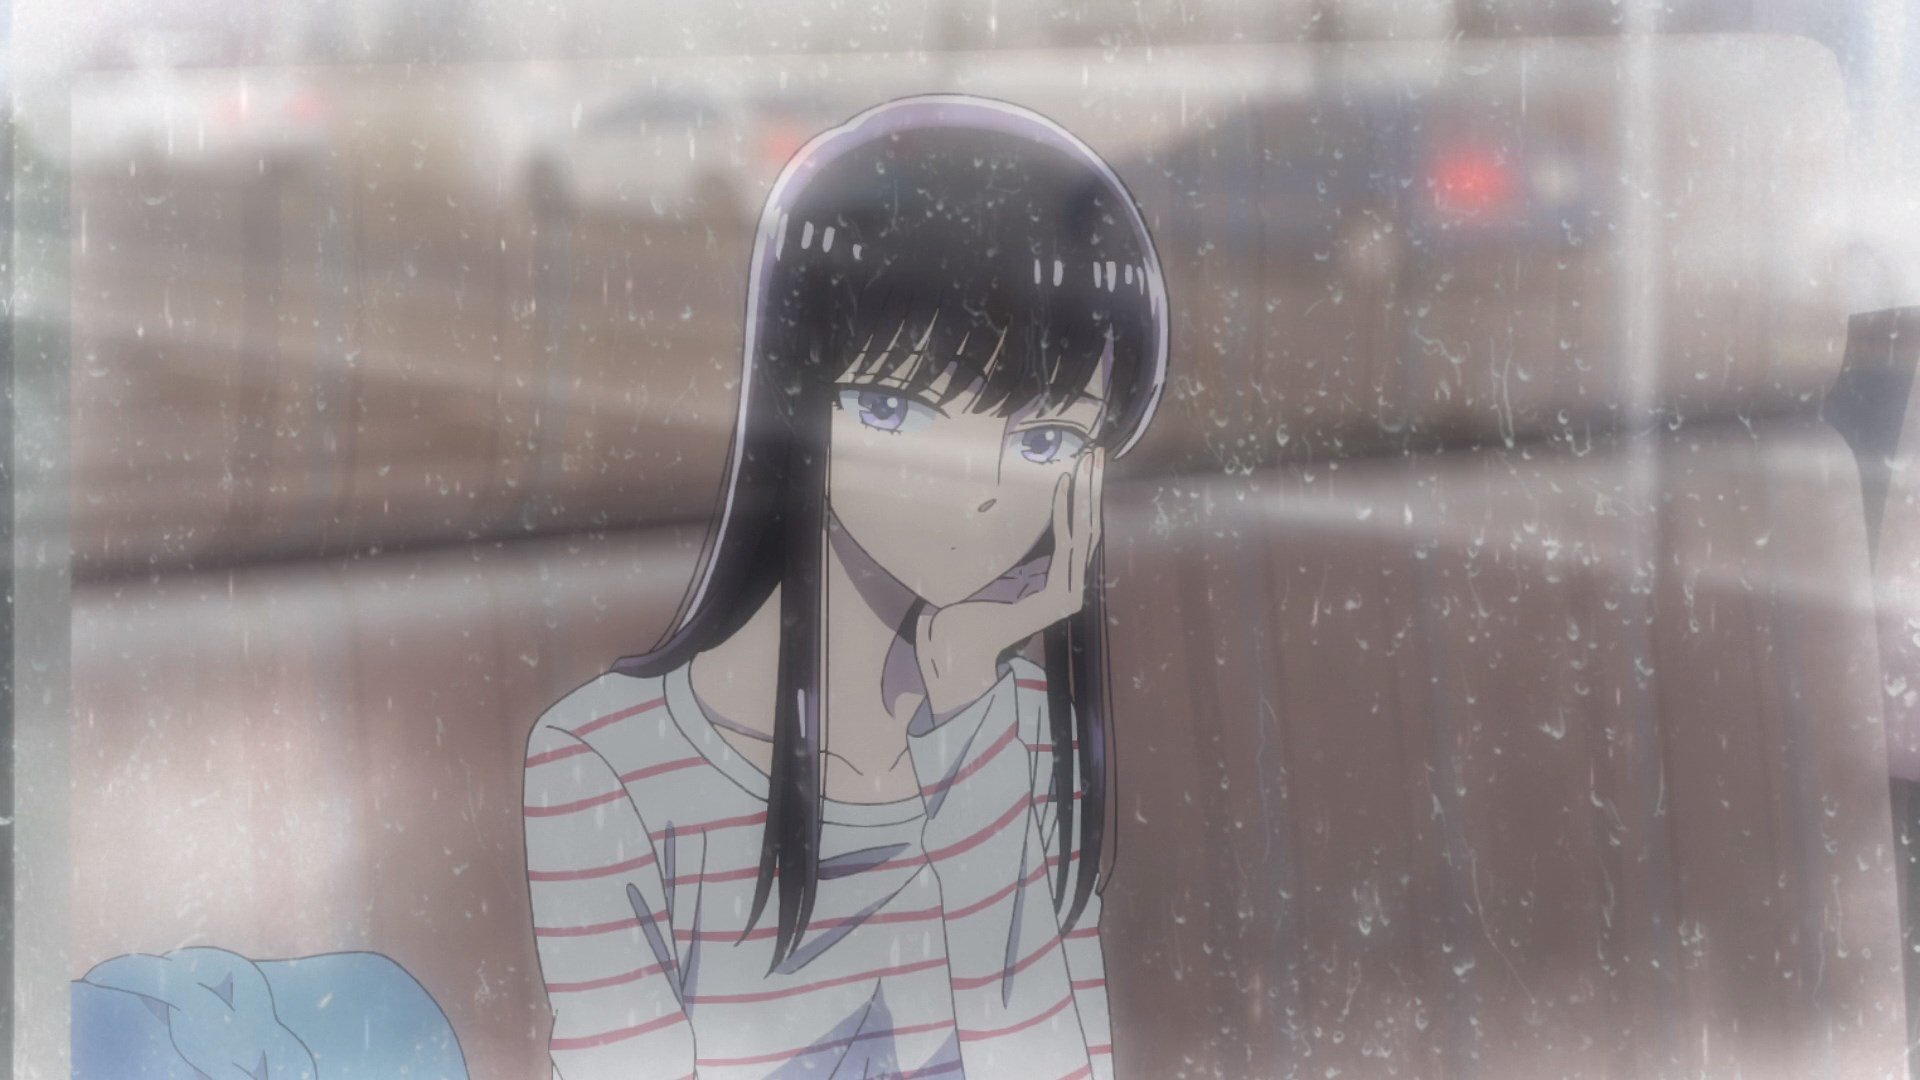 Anime 1920x1080 After the Rain anime sad alone dark hair purple eyes water on glass long hair women indoors looking out window